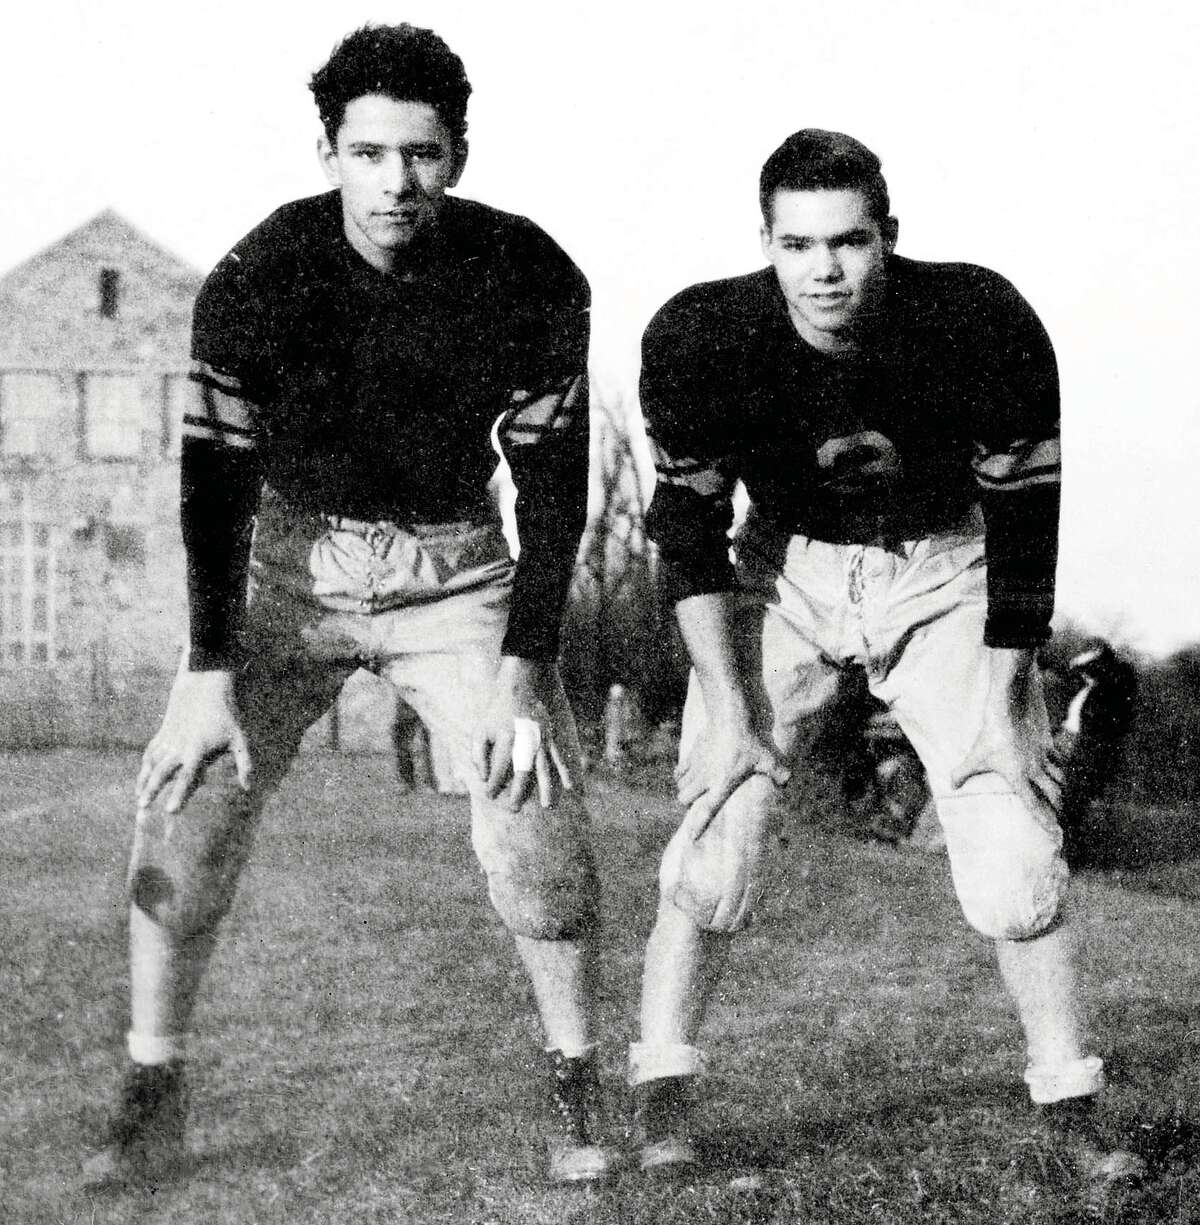 Columnist Woody Klein, left, and friend Robert Pack, now a resident of Missoula, Mont., during their time as football players at Fieldston High School in Riverdale, N.Y., in the 1940s. Friends for 75 years, they call themselves “The Corsican Brothers.”